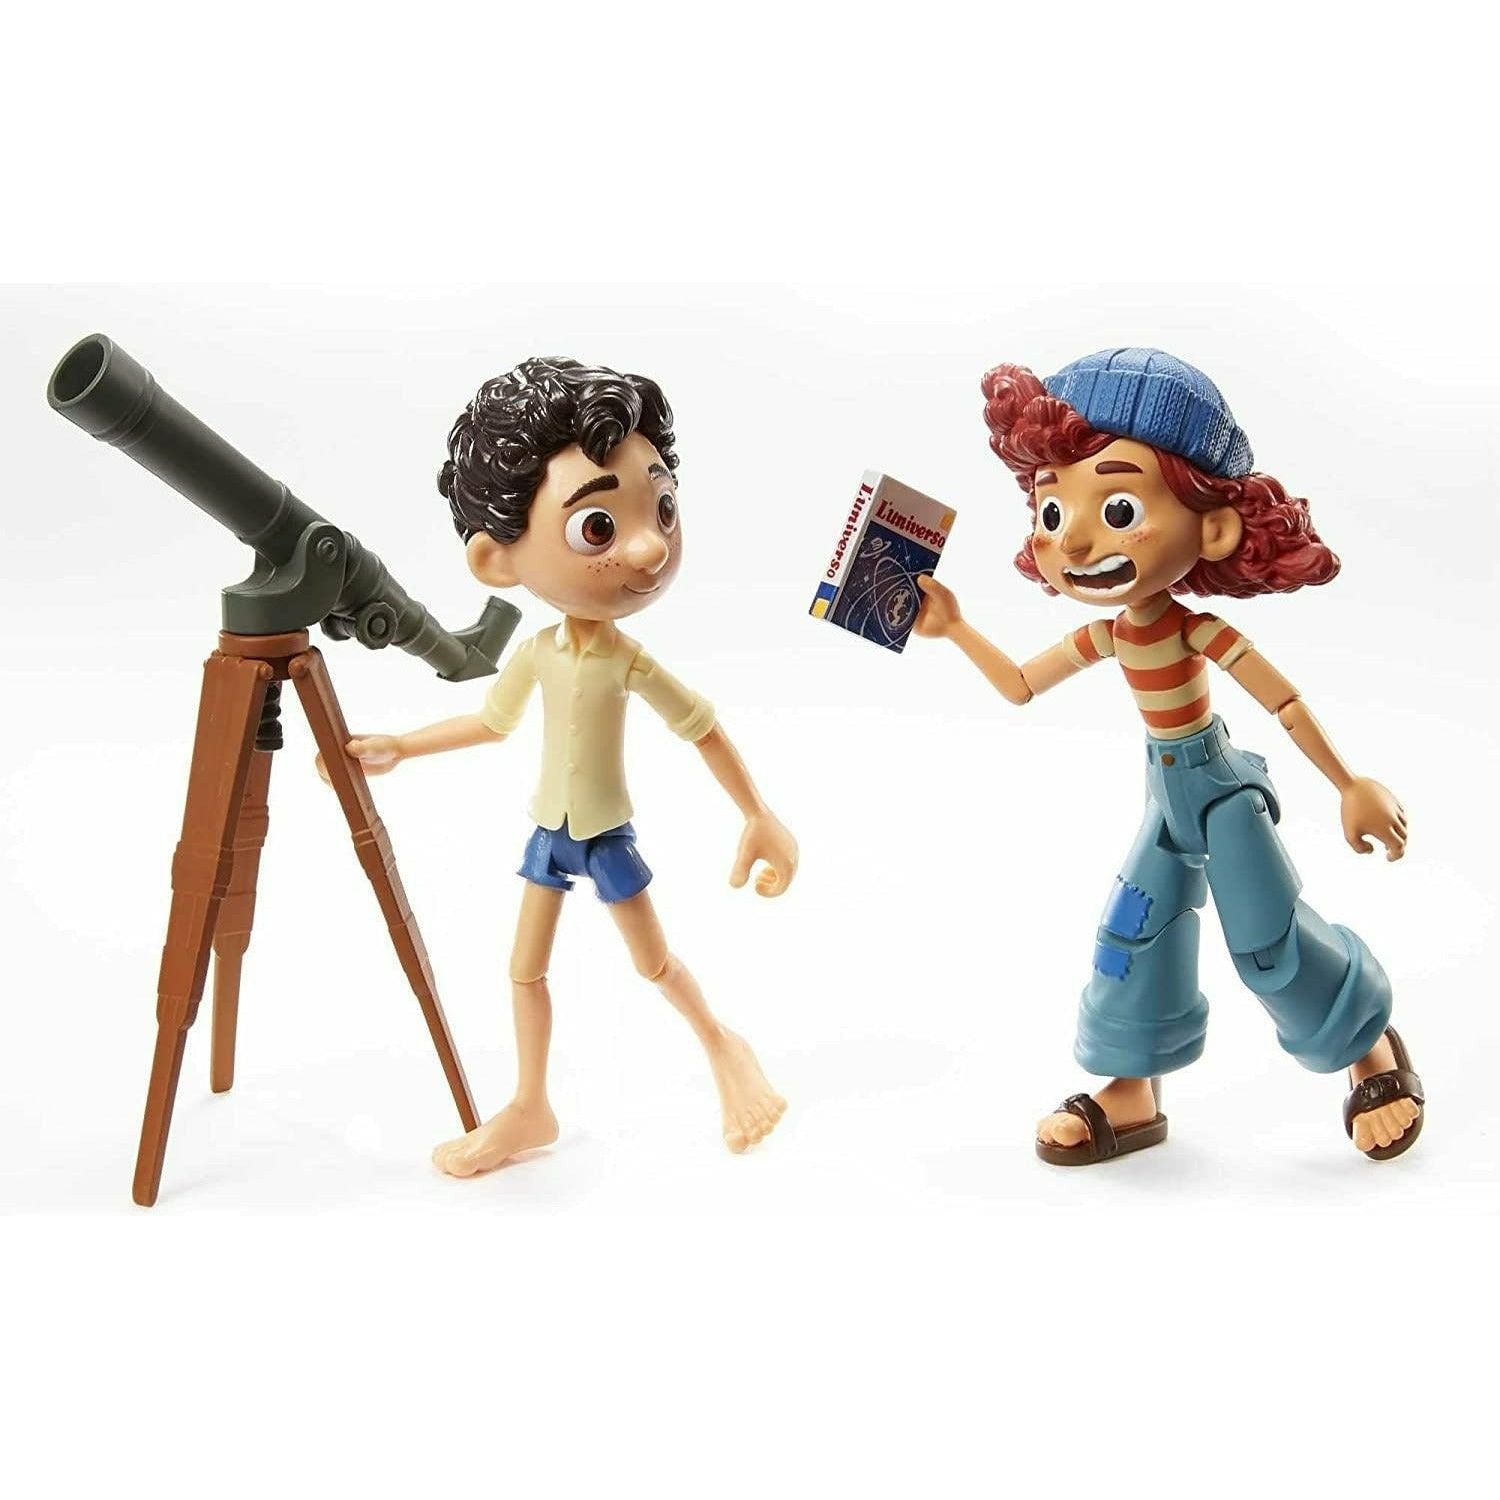 Disney/Pixar Luca Stargazers Pack with Luca Paguro & Giulia Posable Authentic Action Figure - BumbleToys - 4+ Years, 5-7 Years, Action Figures, Boys, Disney, Figures, Girls, Luca, Pre-Order